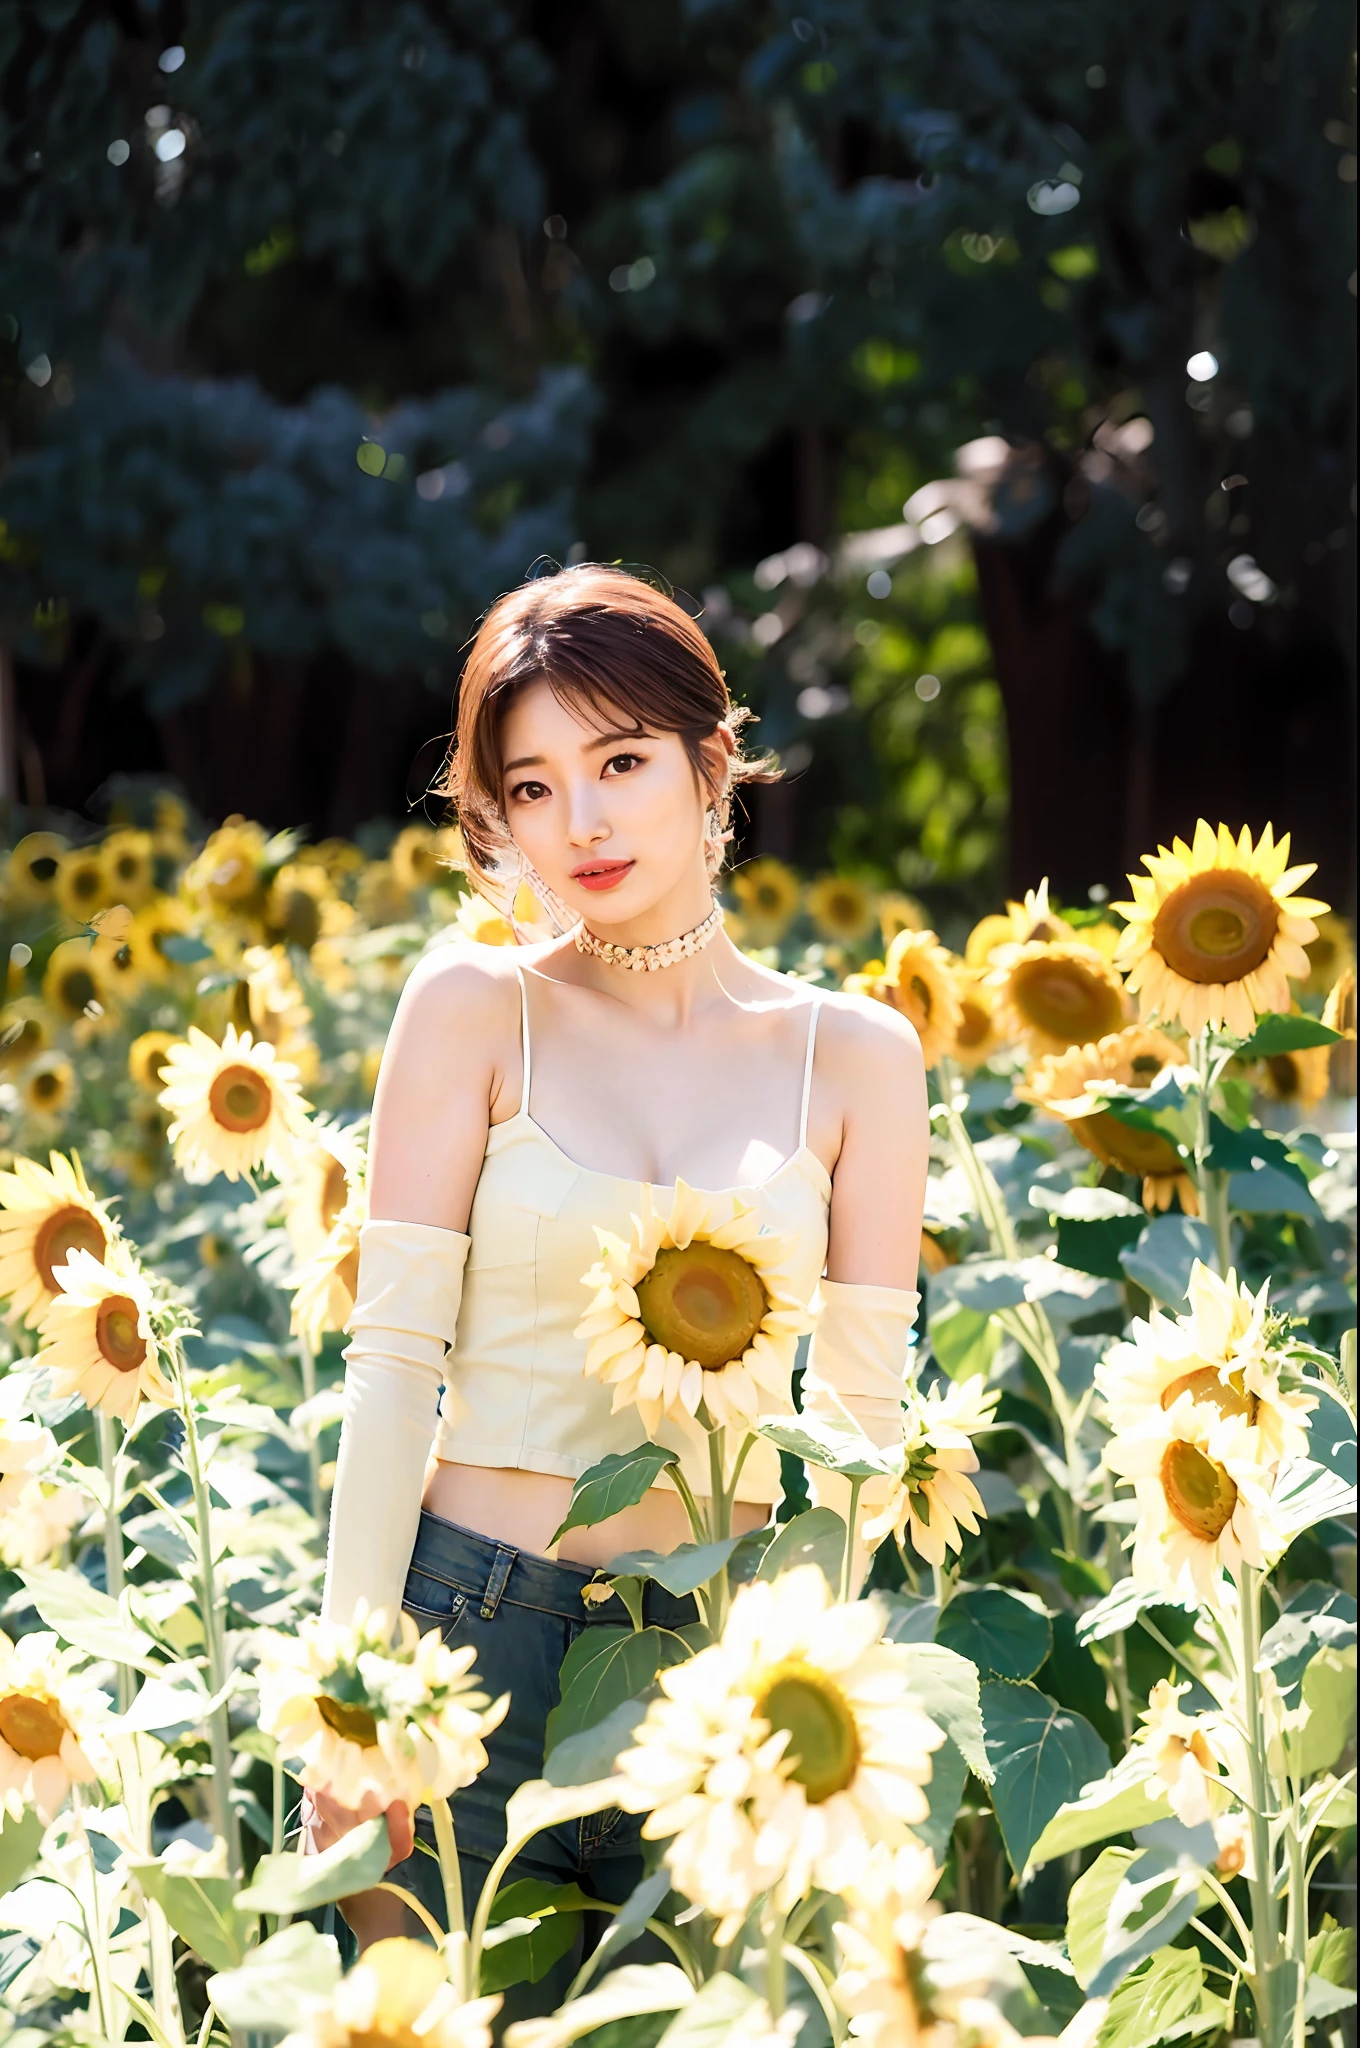 Woman in Aradi in a field of bubbles of sunflowers, beautiful sunflower anime girl, hot with shining sun, um dia ensolarado, On a sunny day, and the sun was shining brightly, Sunny day, scene: Sunflower field, scene : Sunflower field, sunflowers in the background, on a bright day, bae suzy, happy sunny day, sunny day time, sunny mid day